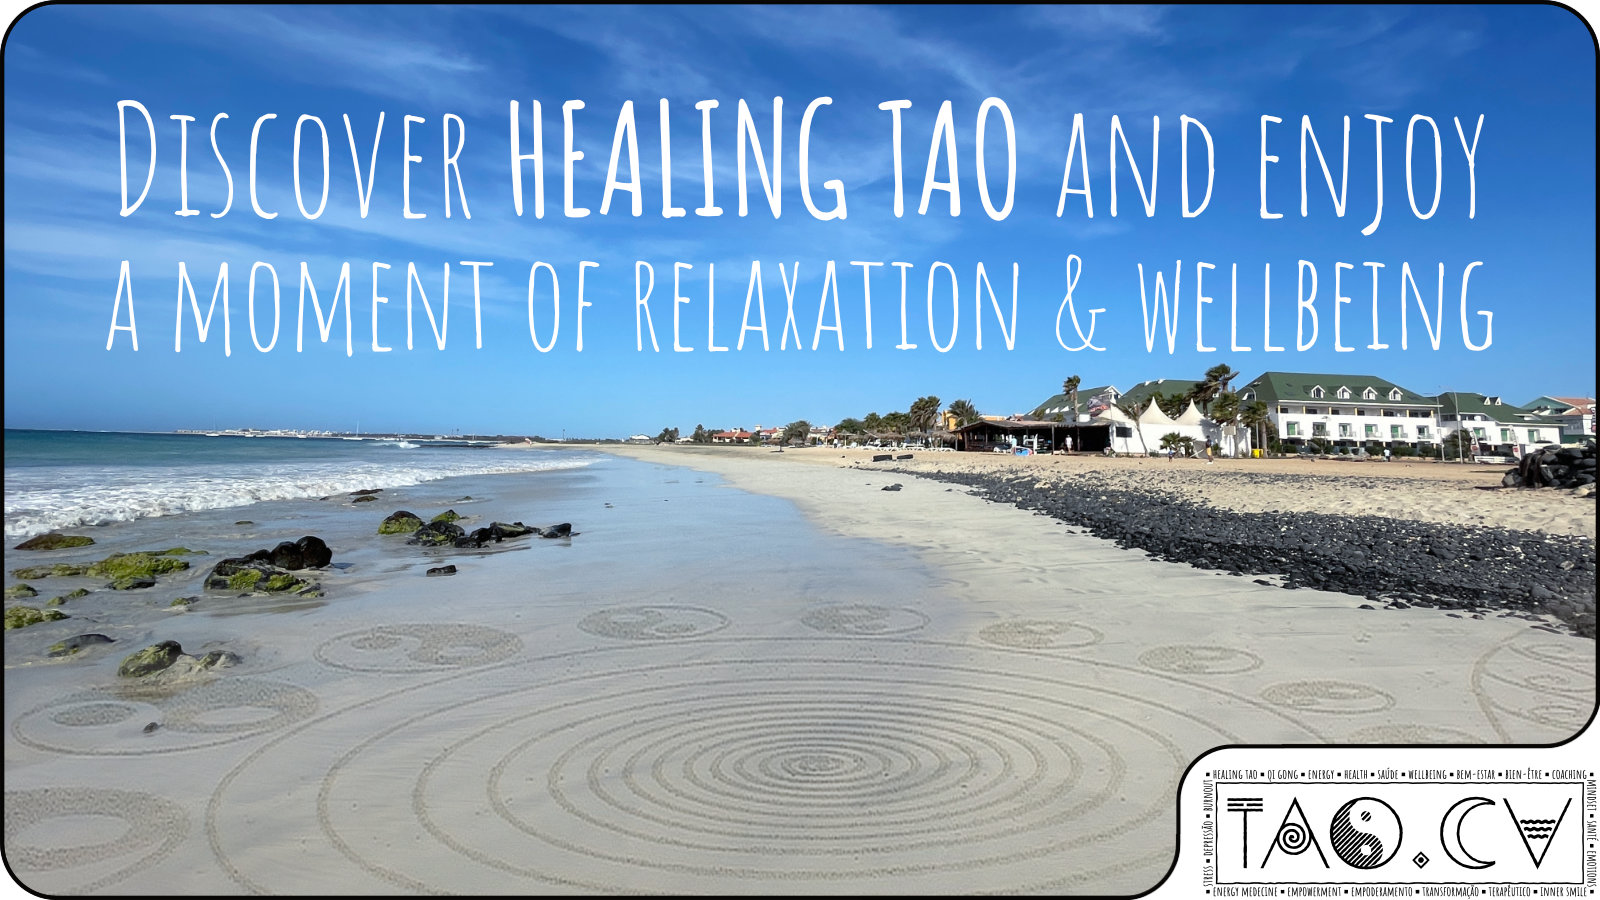 Discover HEALING TAO and enjoy a moment of relaxation & wellbeing